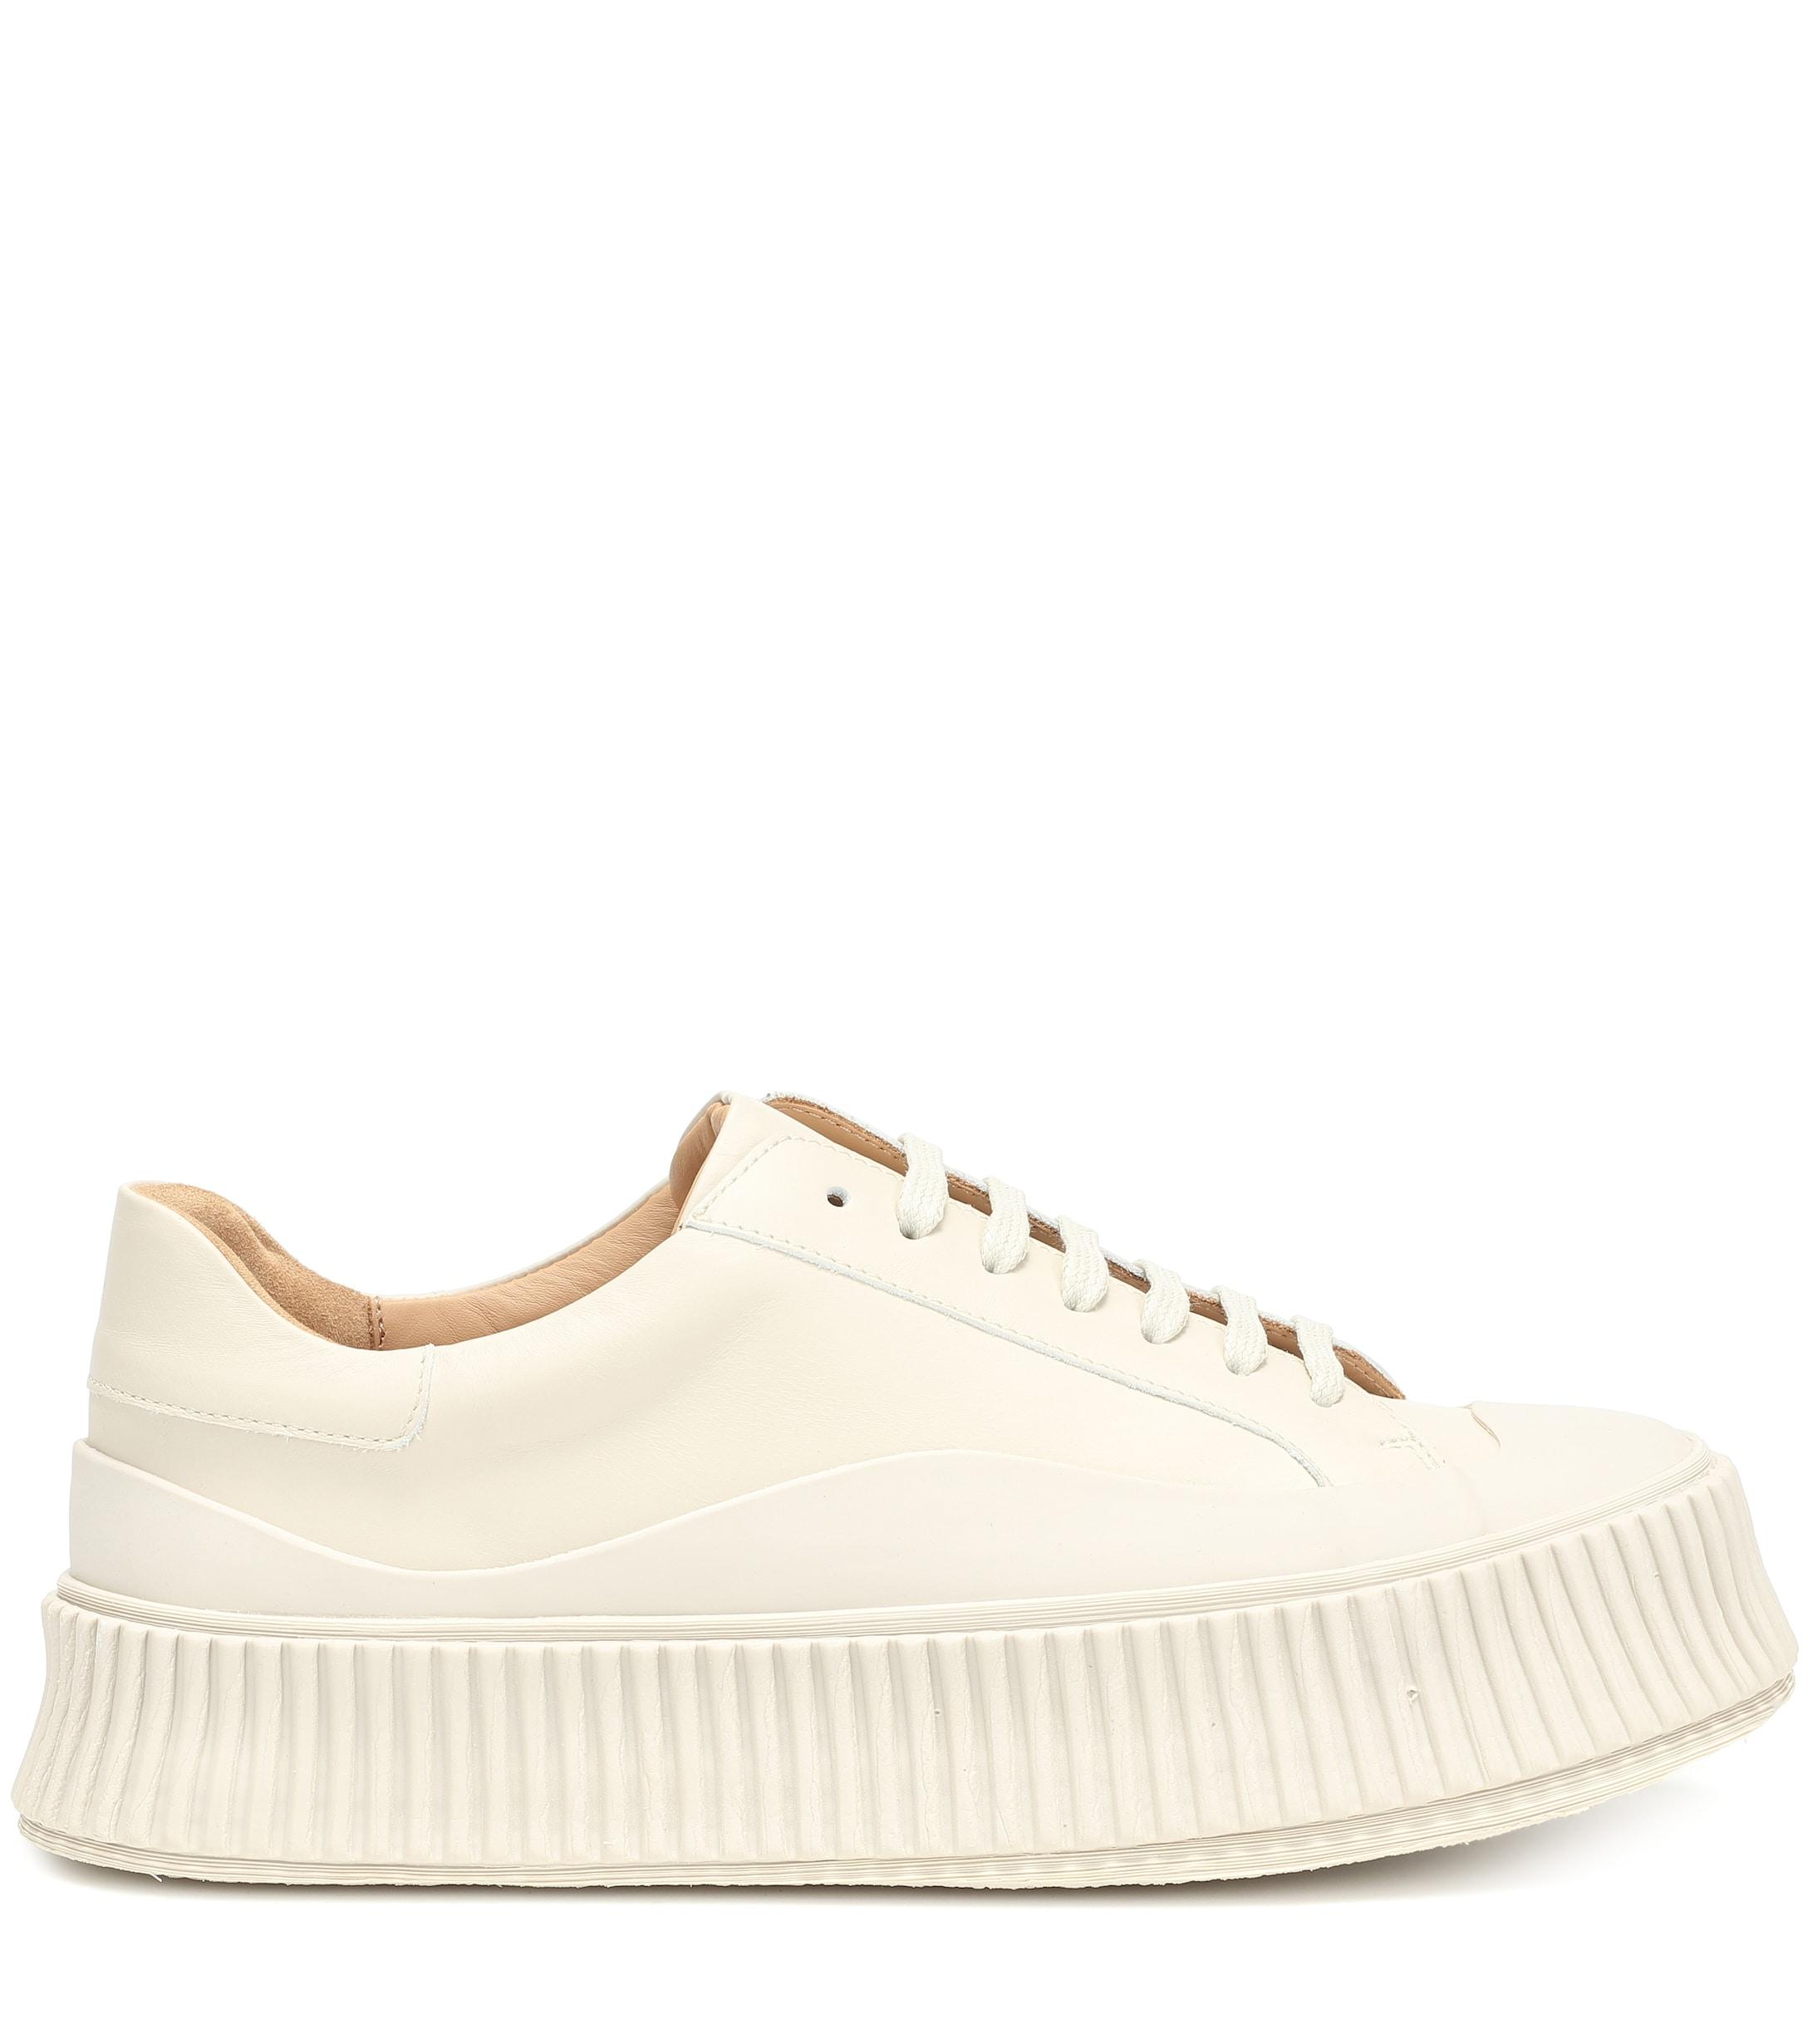 Jil Sander Leather Ribbed Sole Low-top Sneakers in Beige White (White ...